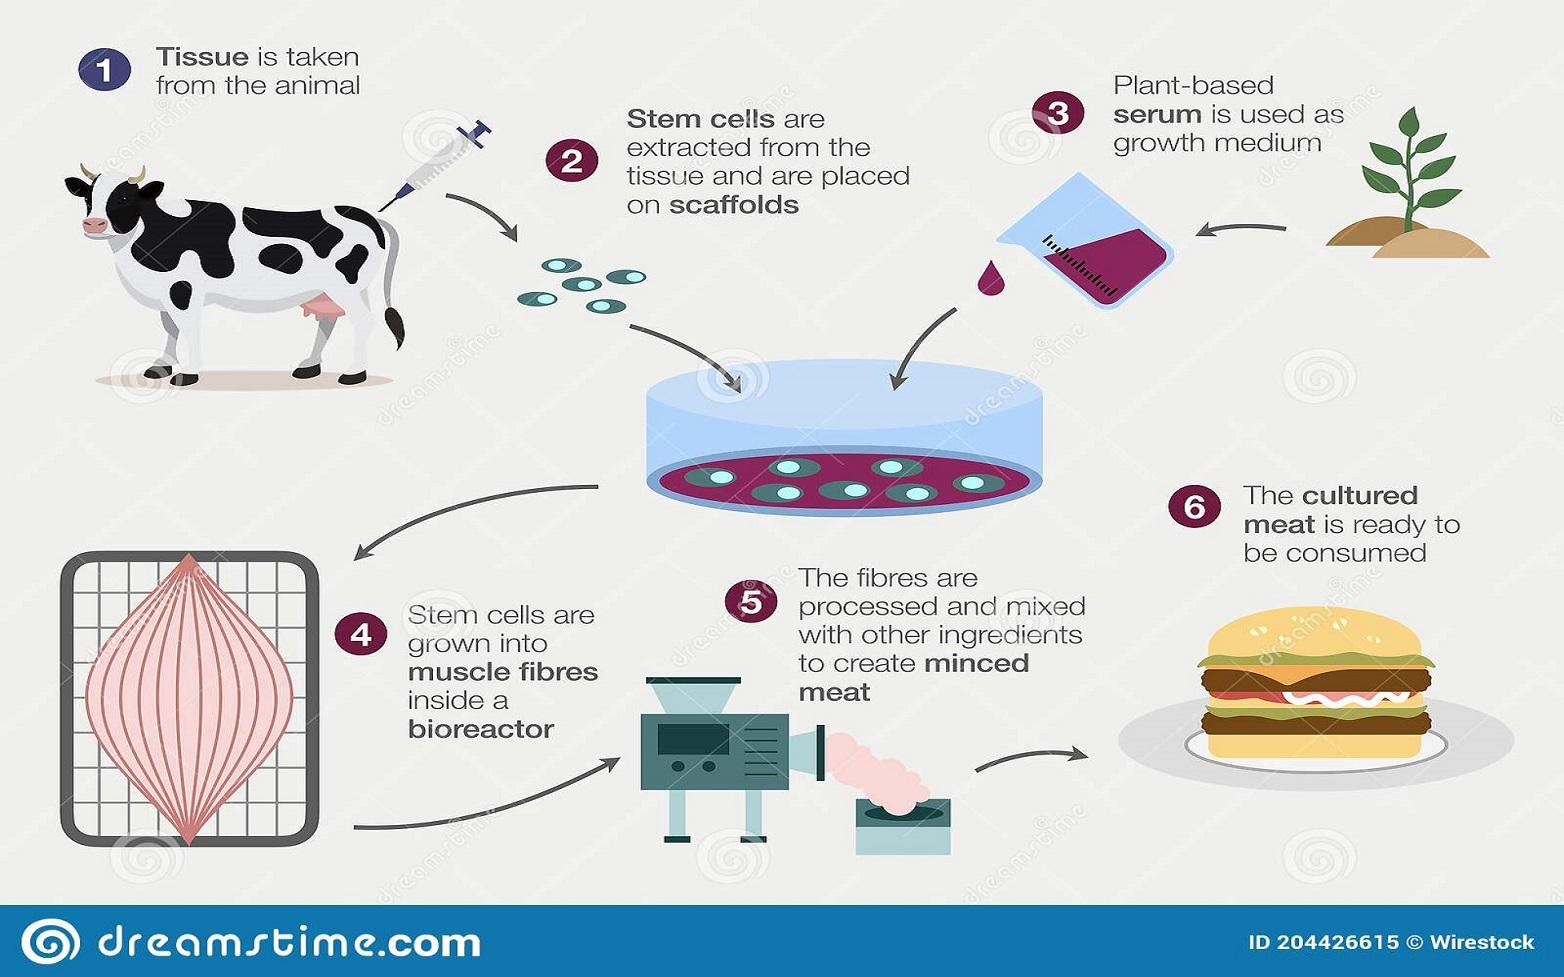 How lab-grown meat is produced (Source: Dreamstime)